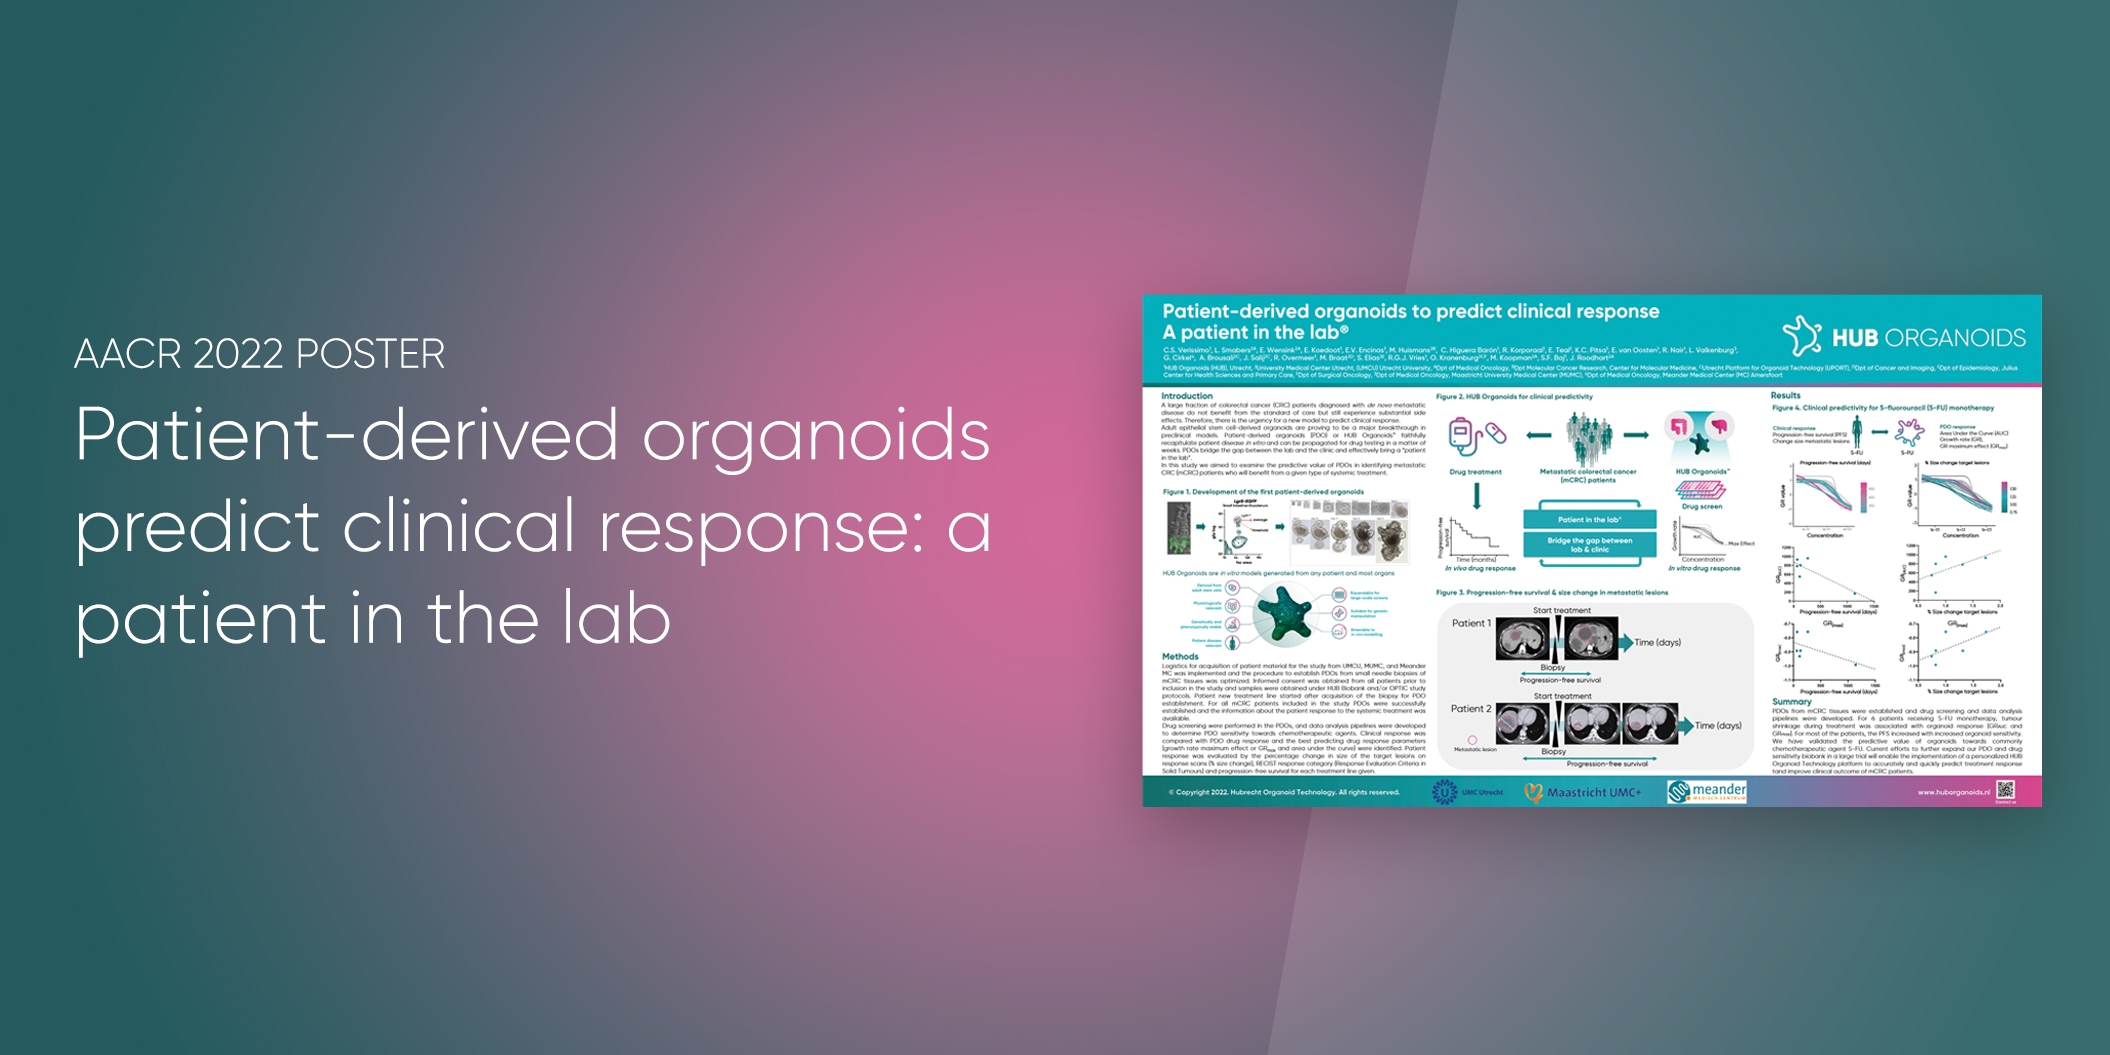 Patient-derived organoids predict clinical response: a patient in the lab